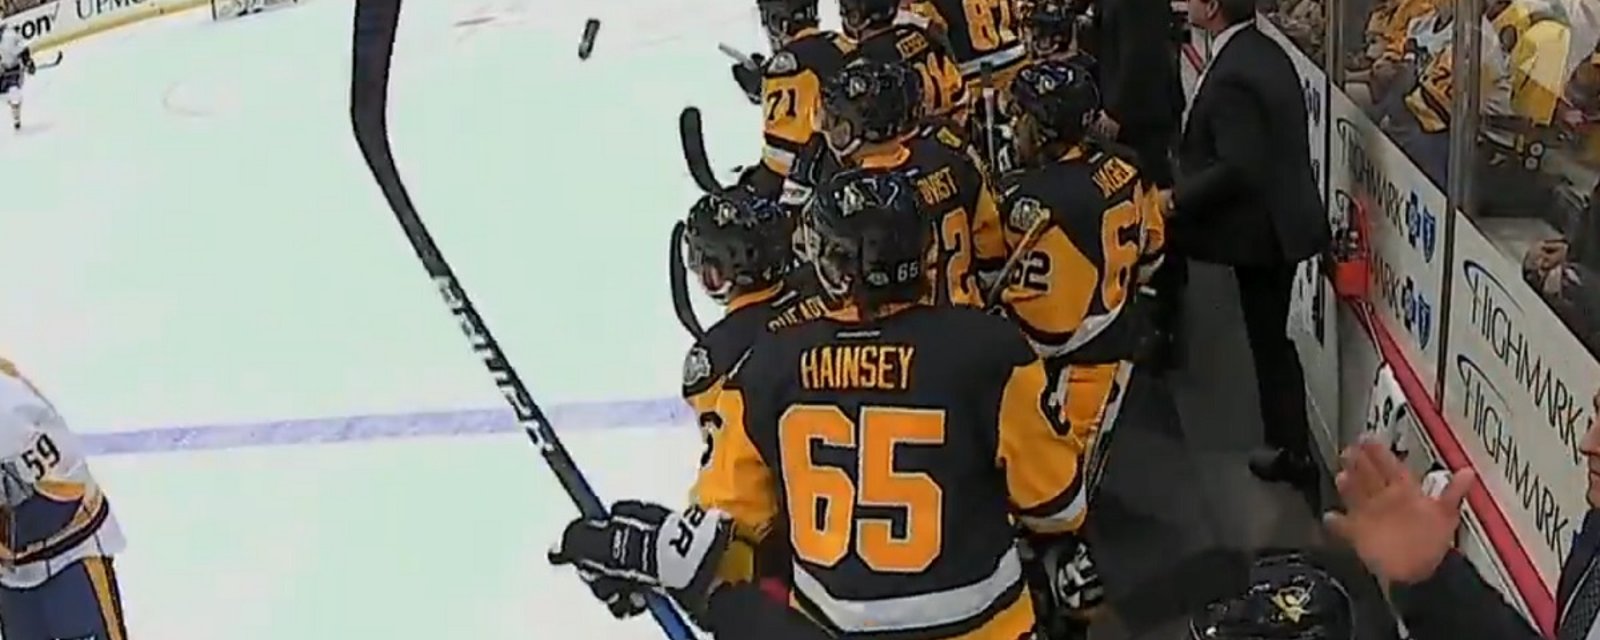 Breaking: Major controversy after Sidney Crosby throws water bottle at player from the bench.